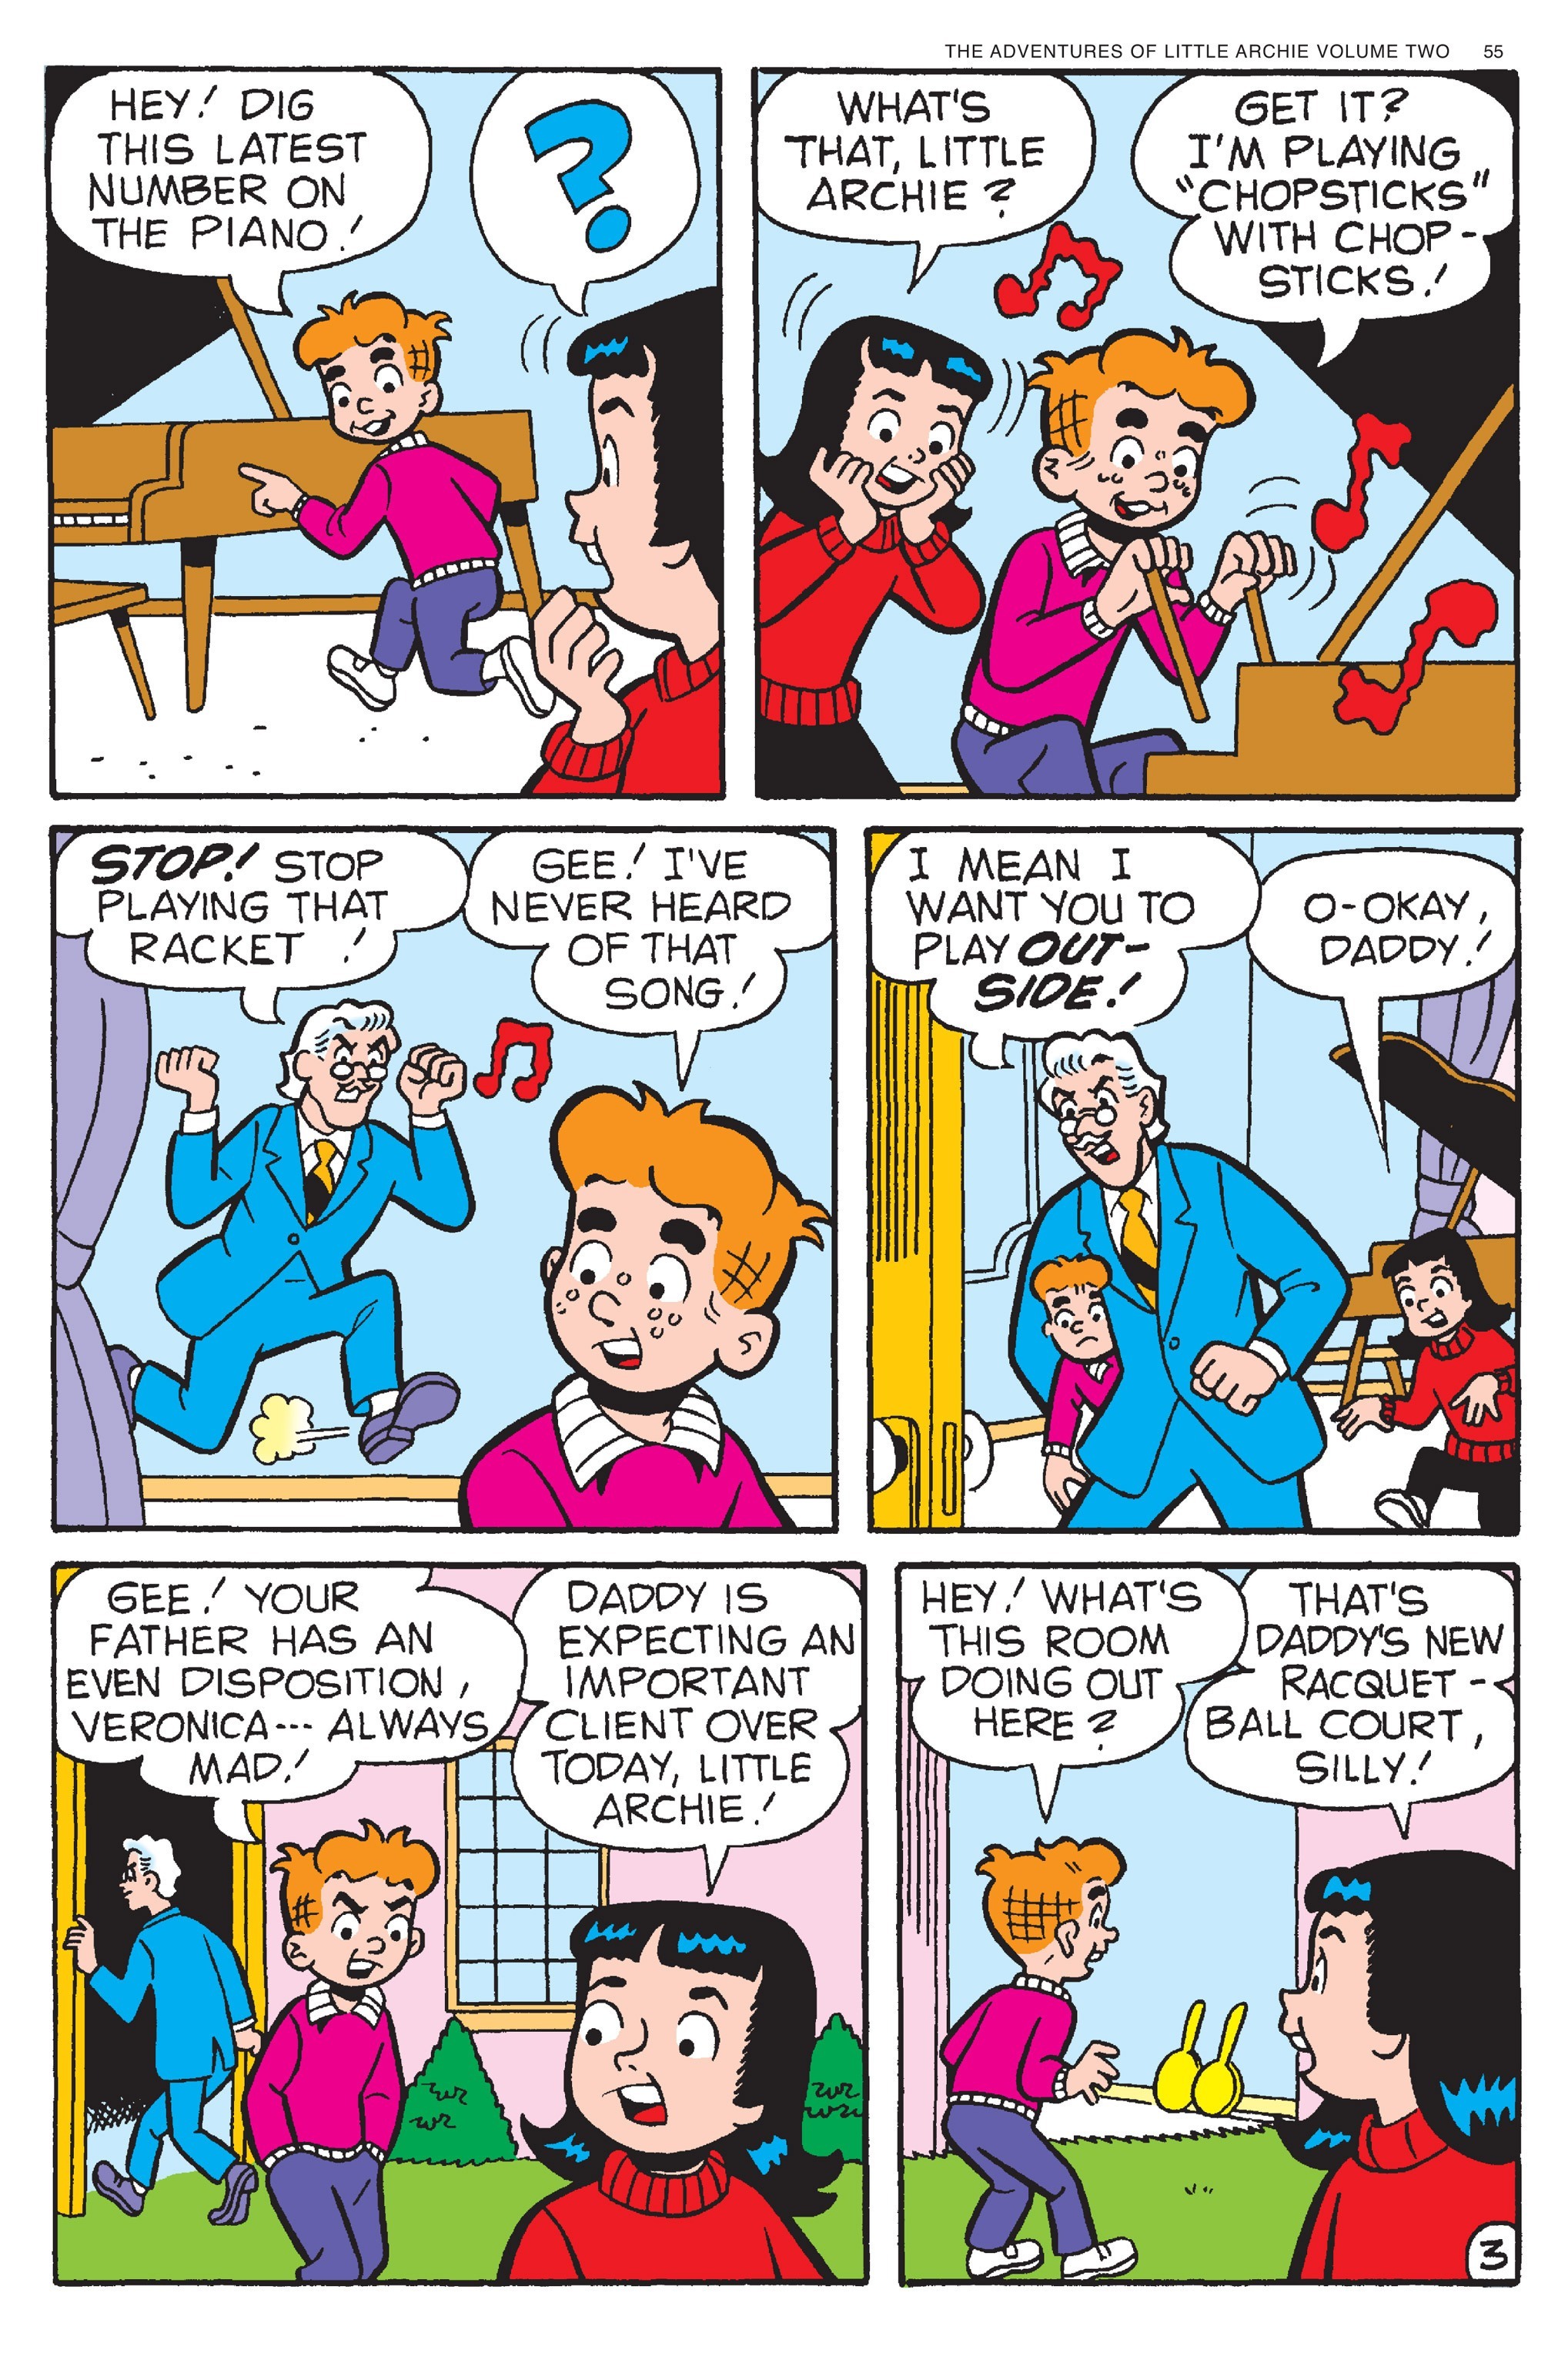 Read online Adventures of Little Archie comic -  Issue # TPB 2 - 56